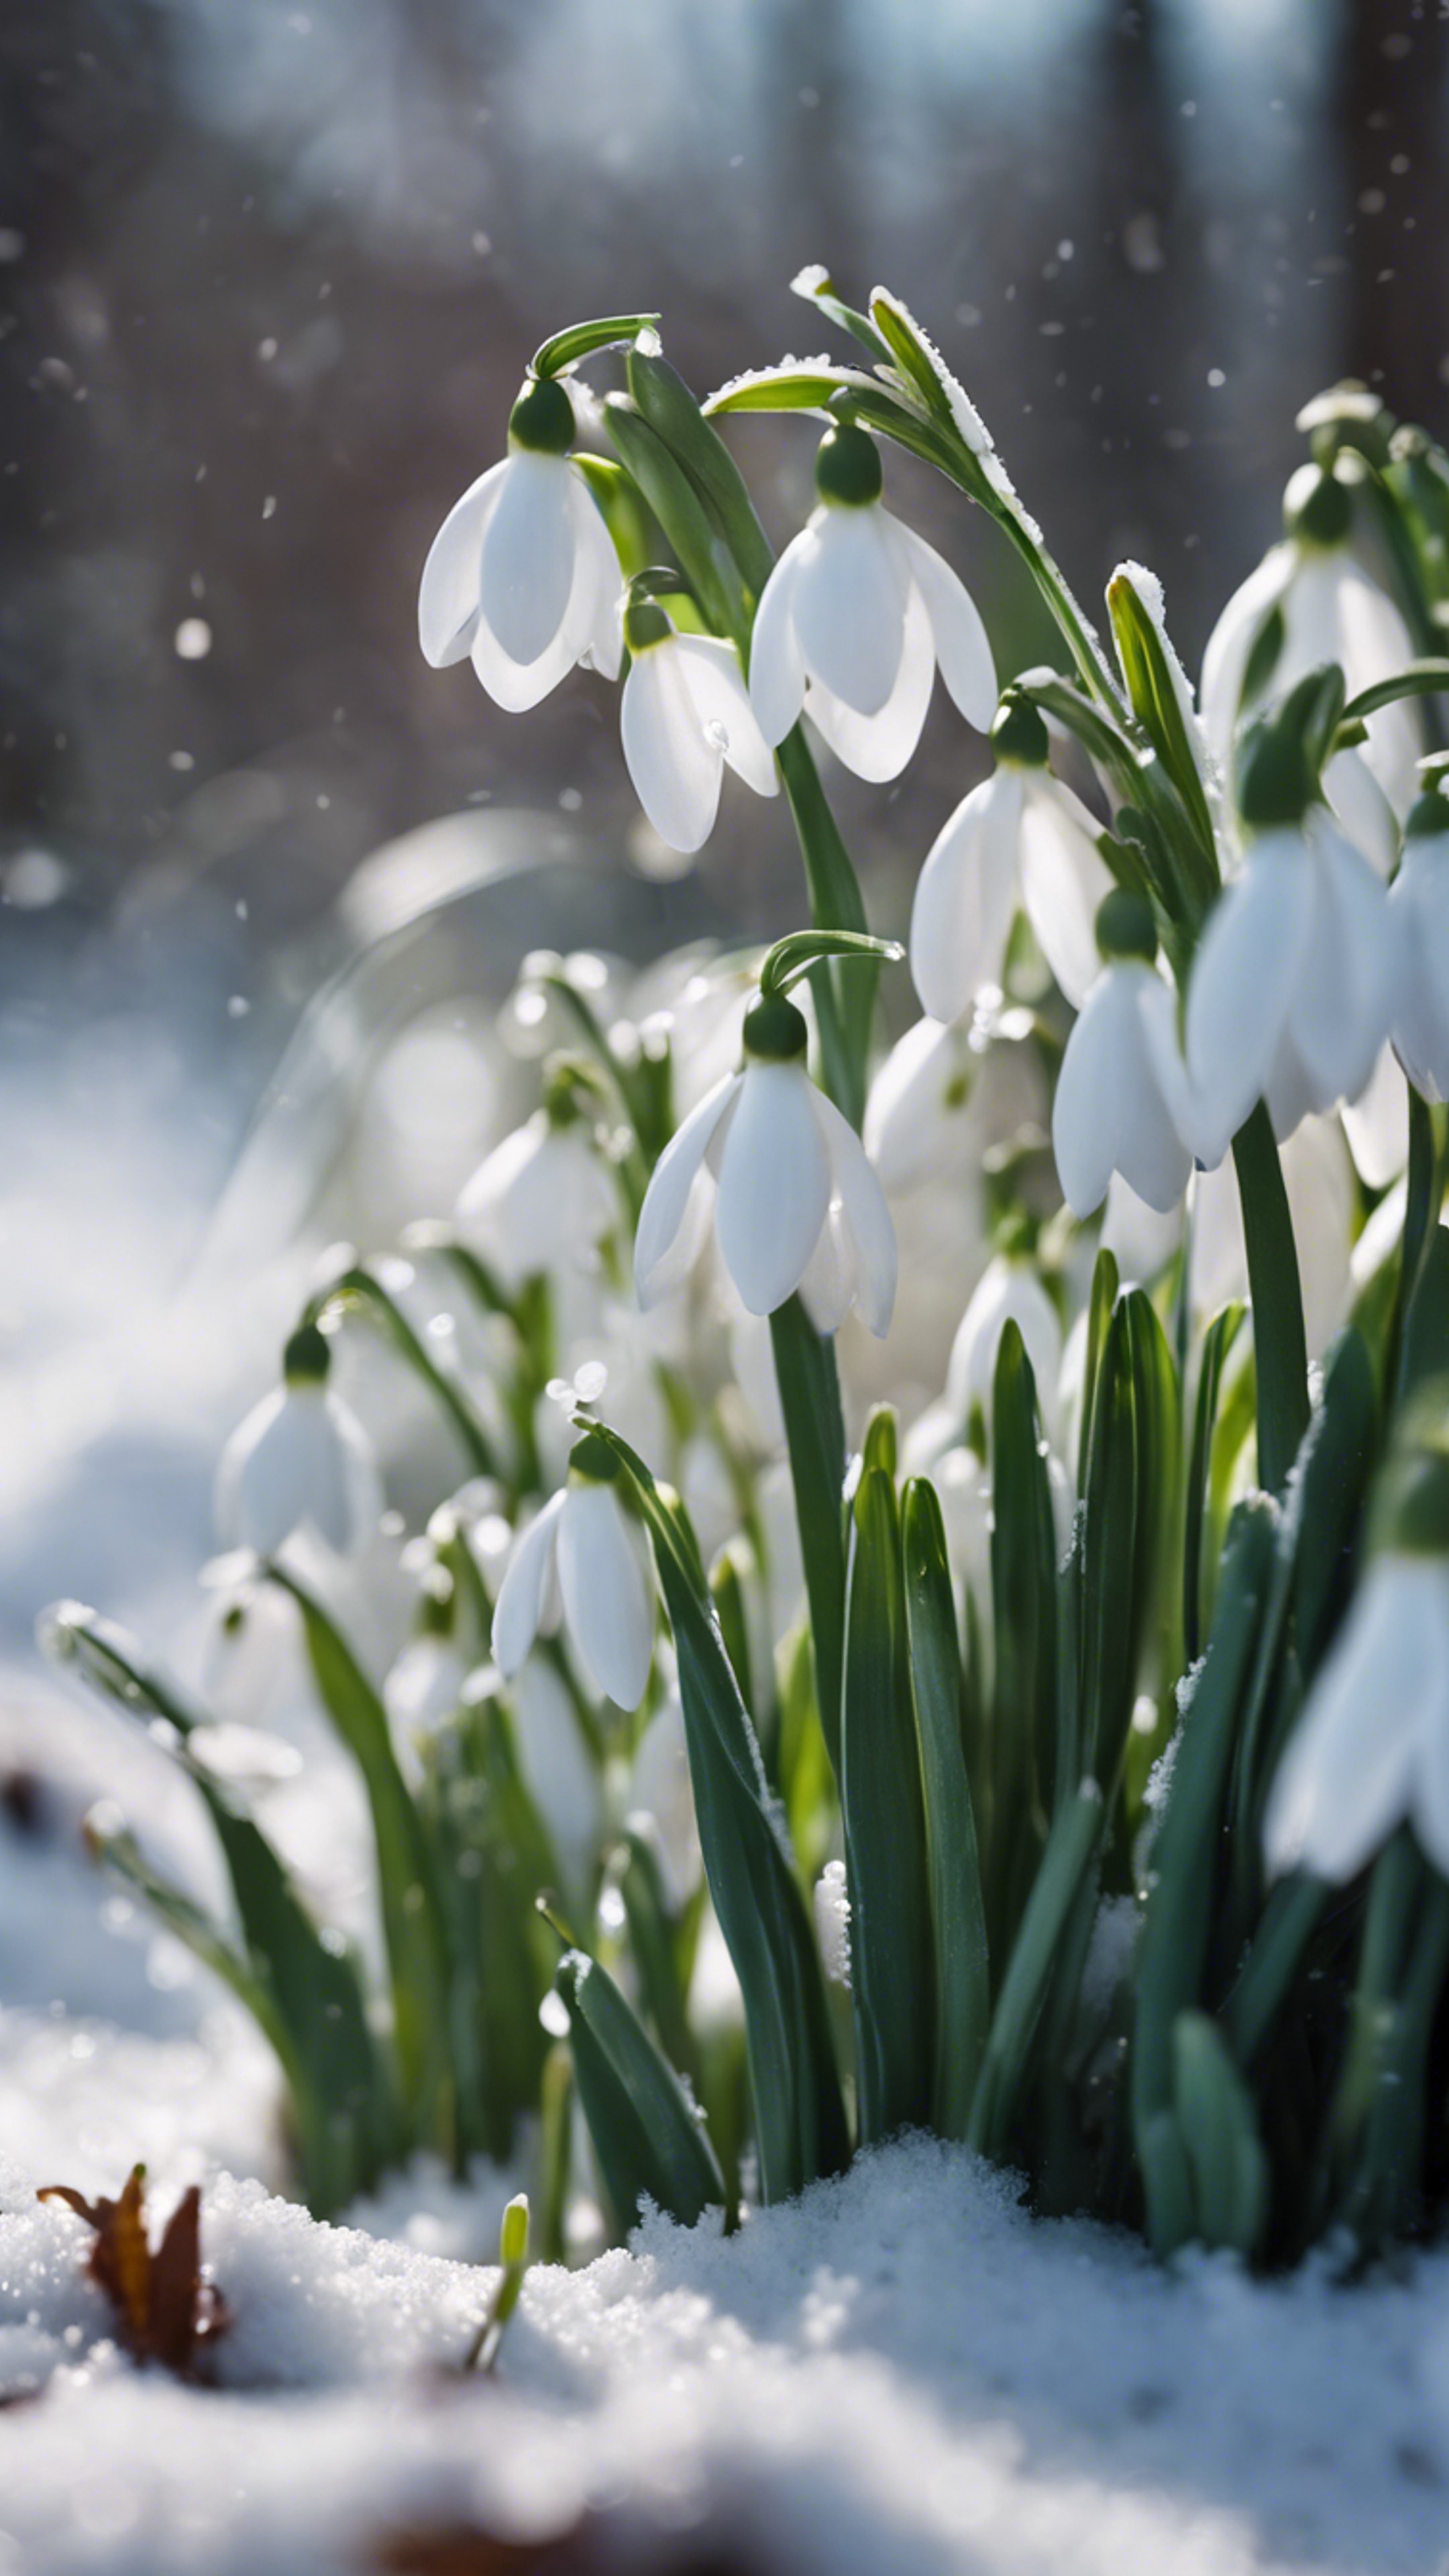 A patch of white snowdrops peeking through a dusting of late spring snow. Sfondo[e64c535efd0a459c9840]